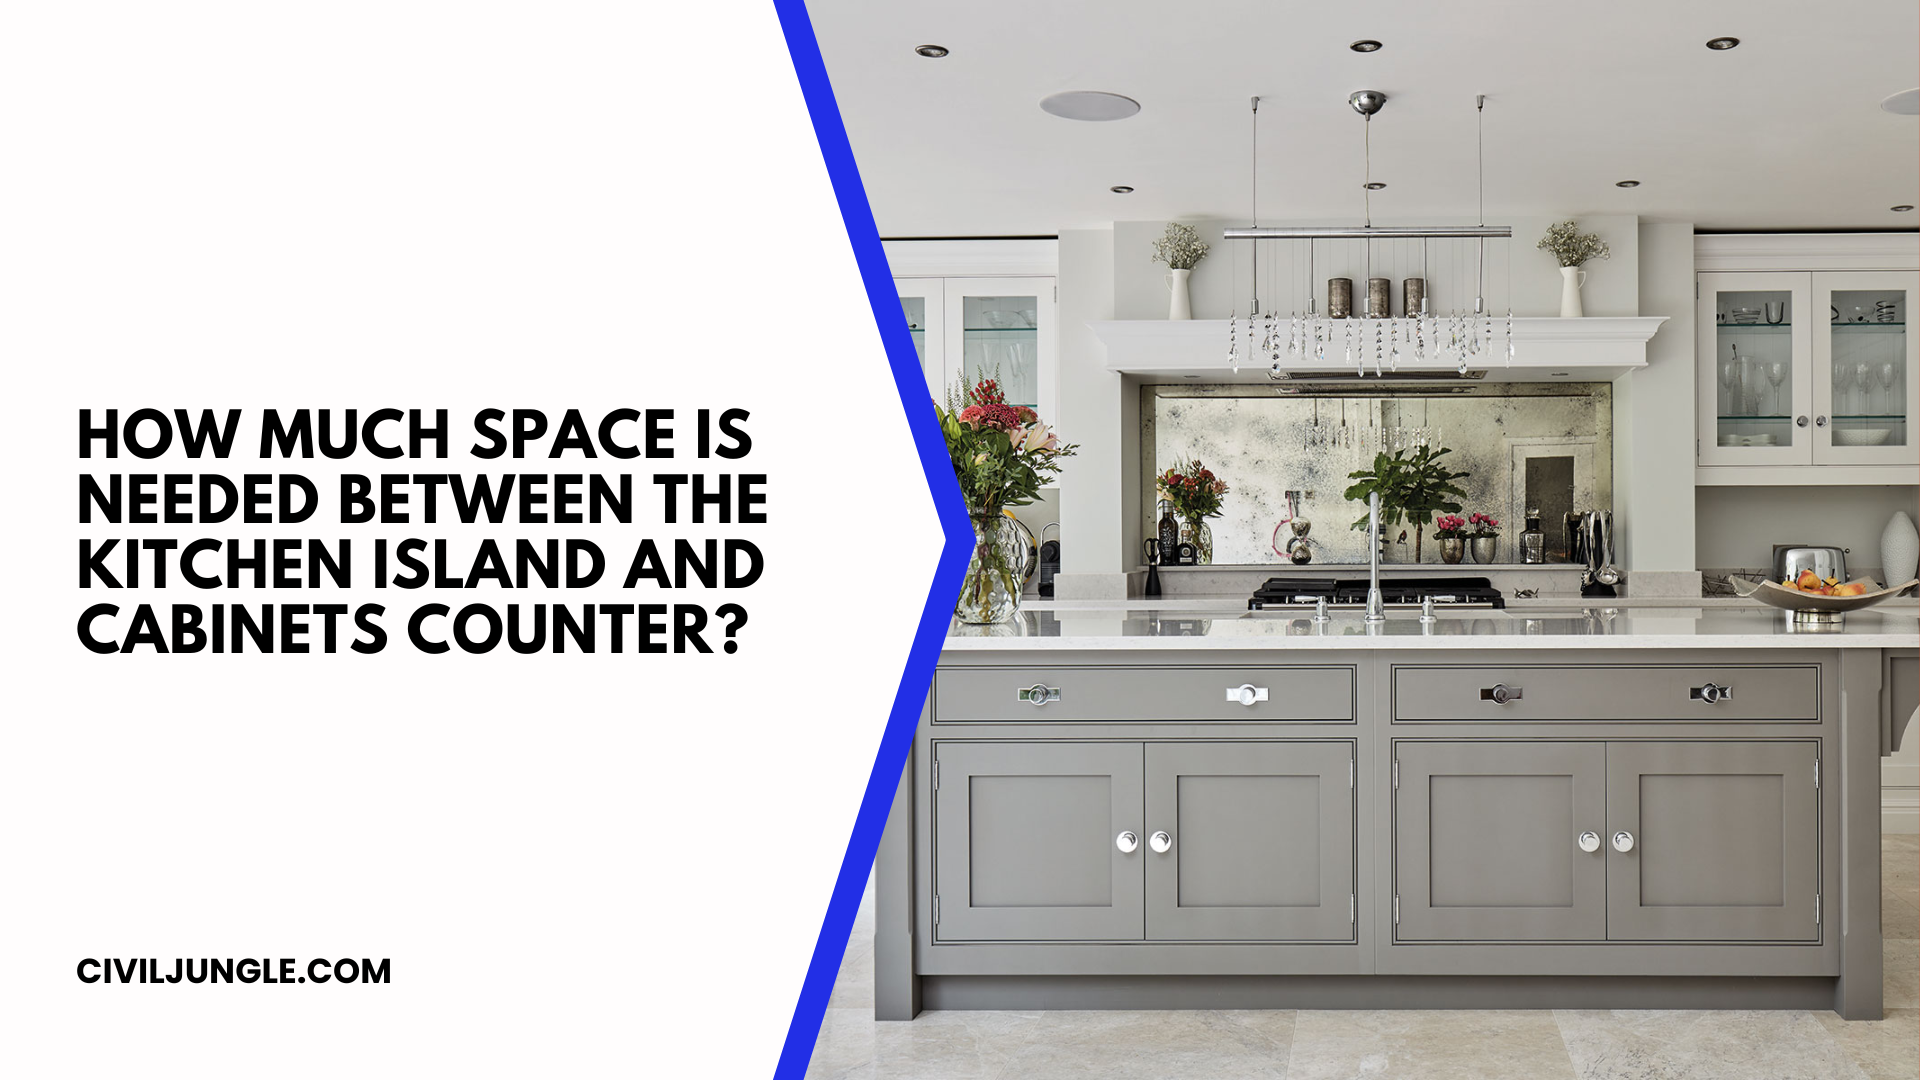 How Much Space Is Needed Between the Kitchen Island and Cabinets Counter?